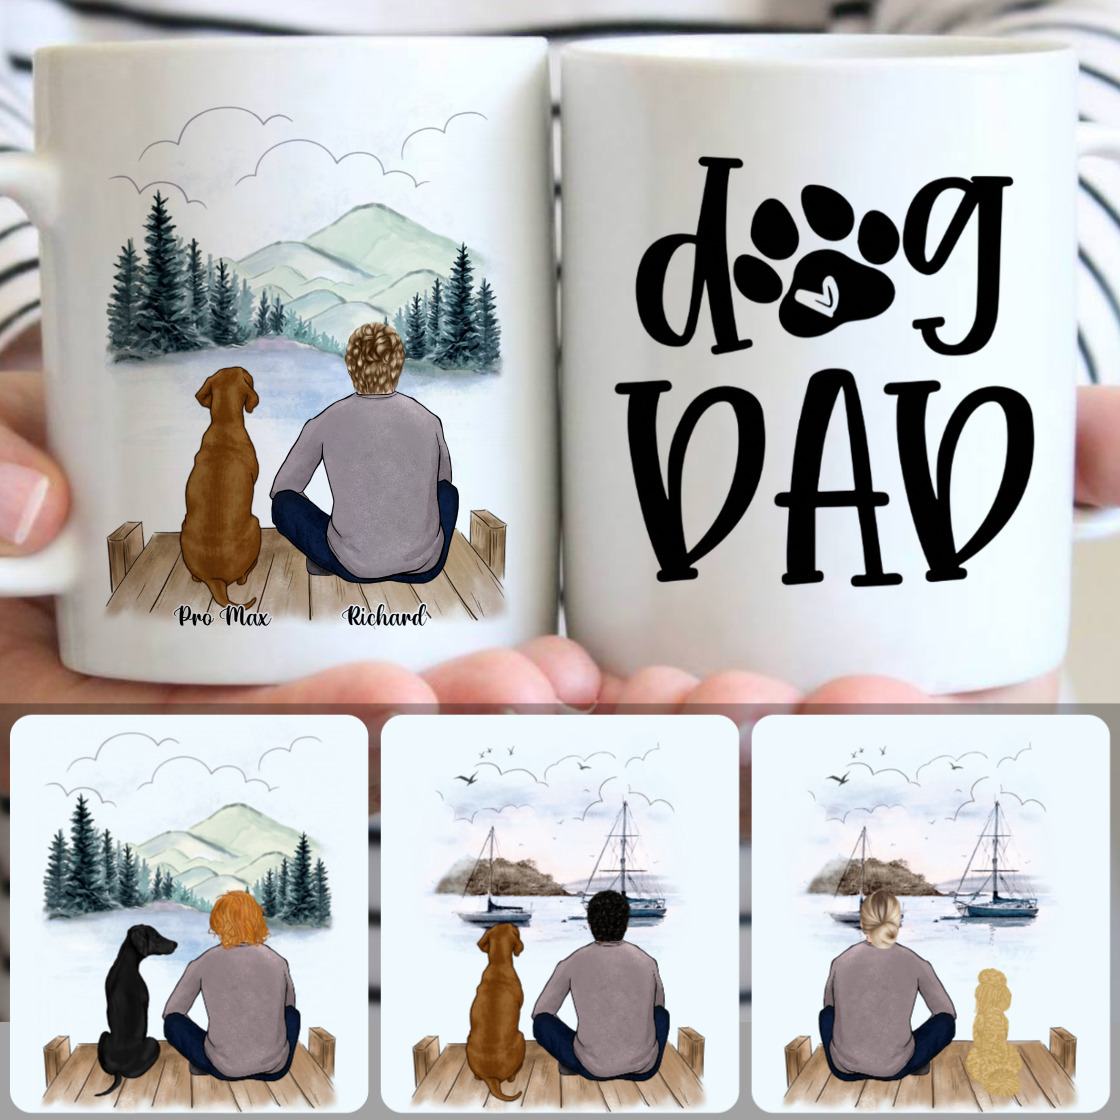 Personalized Mug, Unique Gifts For Grandpa Grandfather, Man & Dog Customized Coffee Mug With Names